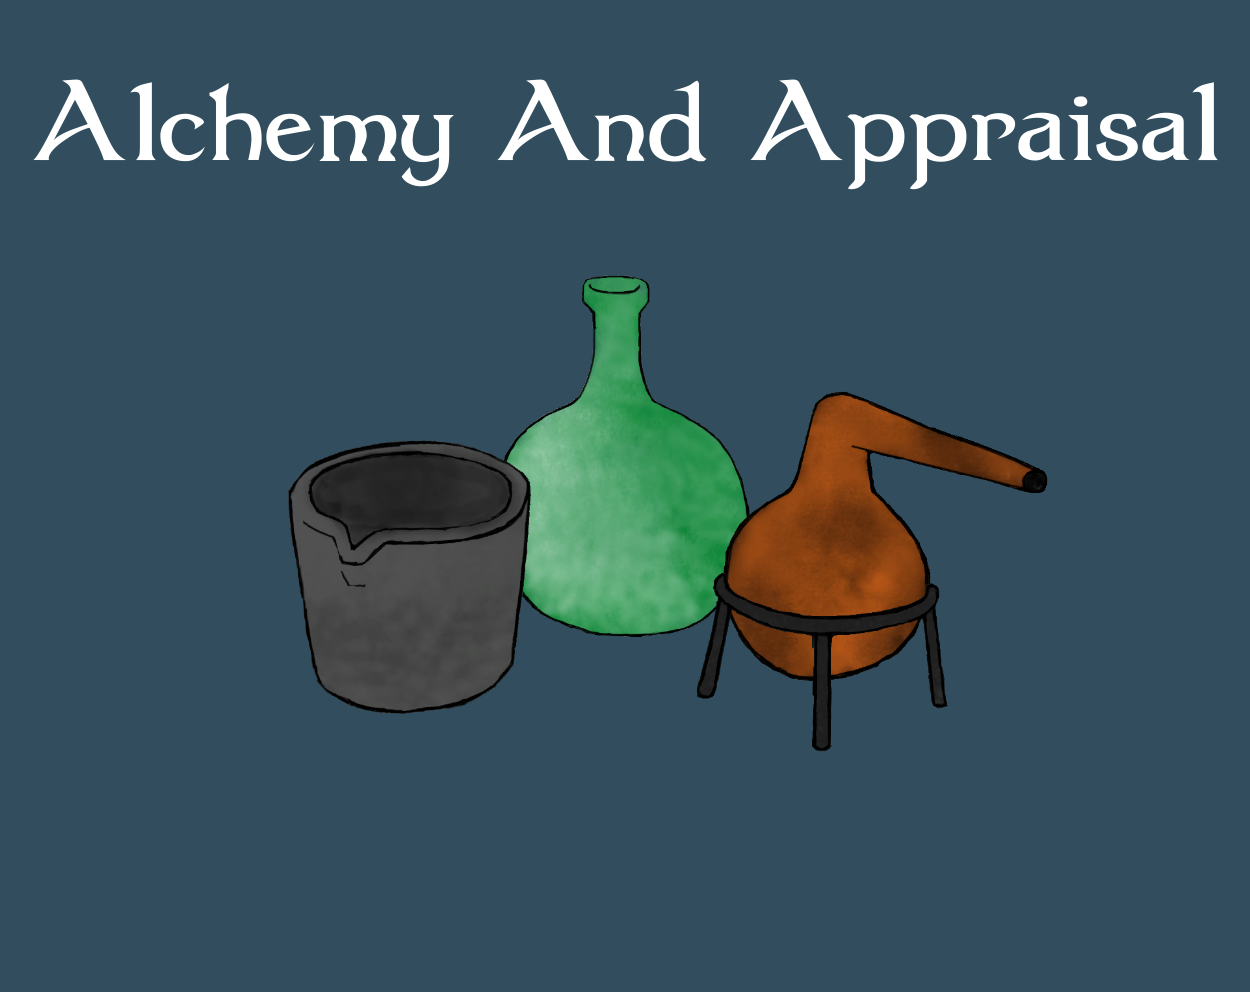 Download Little Alchemy APK v1.0.1 For Android